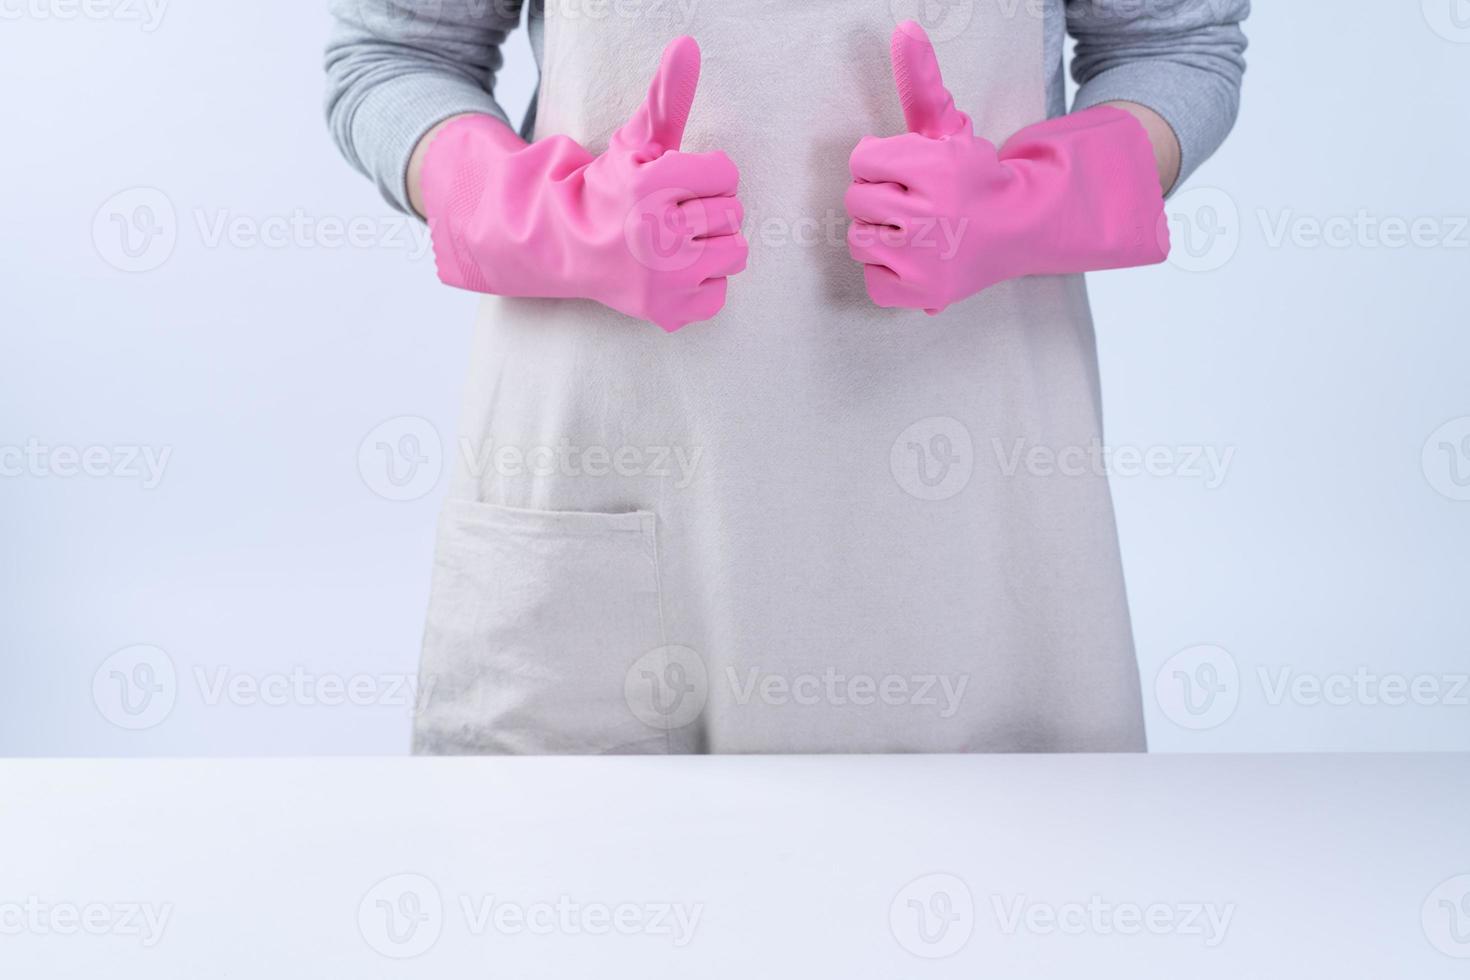 Young woman housekeeper in apron is wearing pink gloves to clean the table, concept of preventing virus infection, housekeeping service, close up. photo